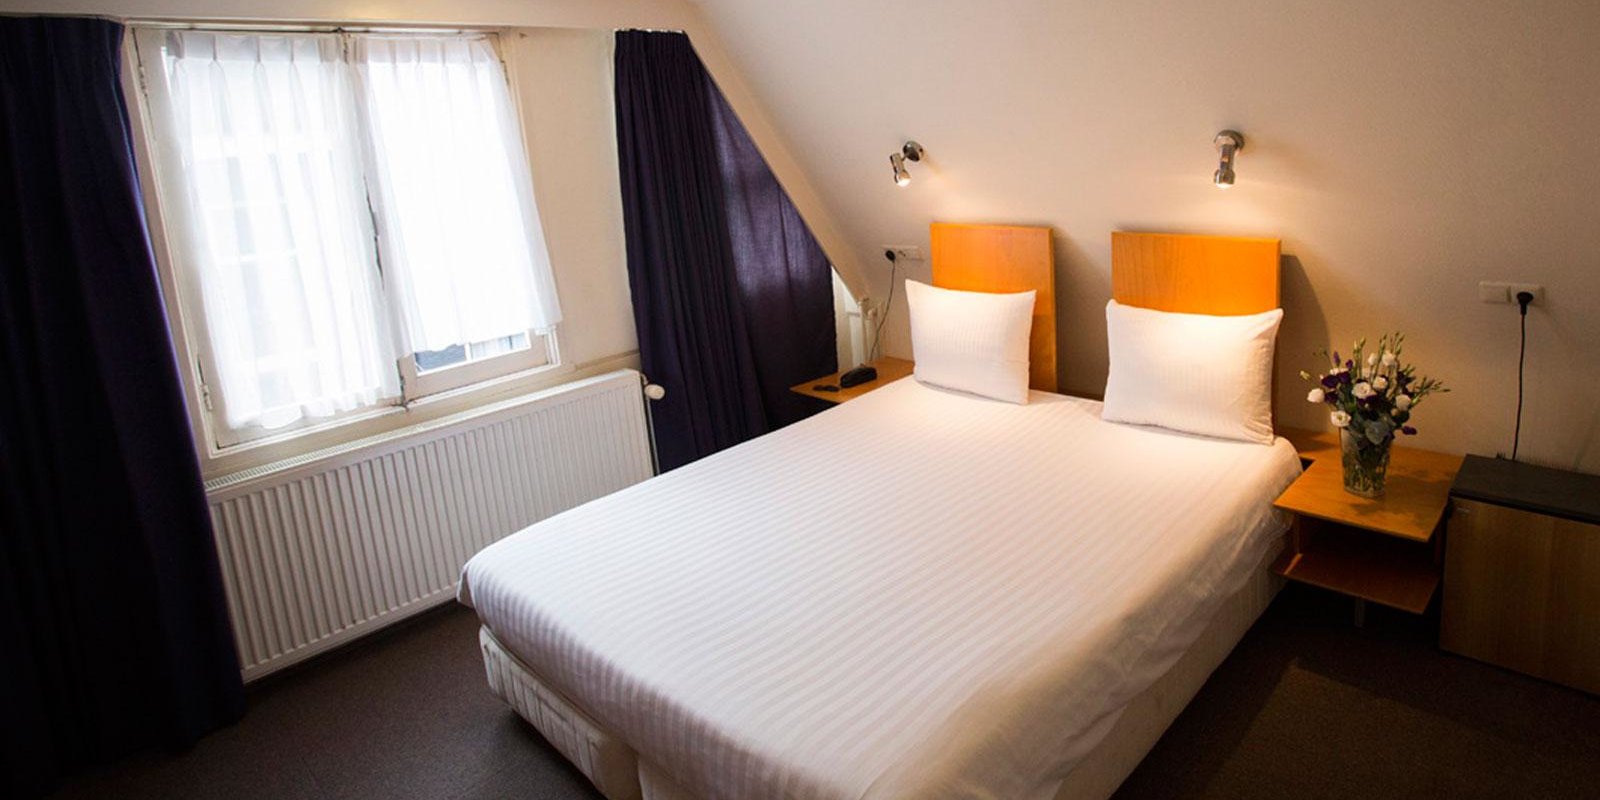 Quentin Golden Bear is a great budget option for gay travellers to Amsterdam